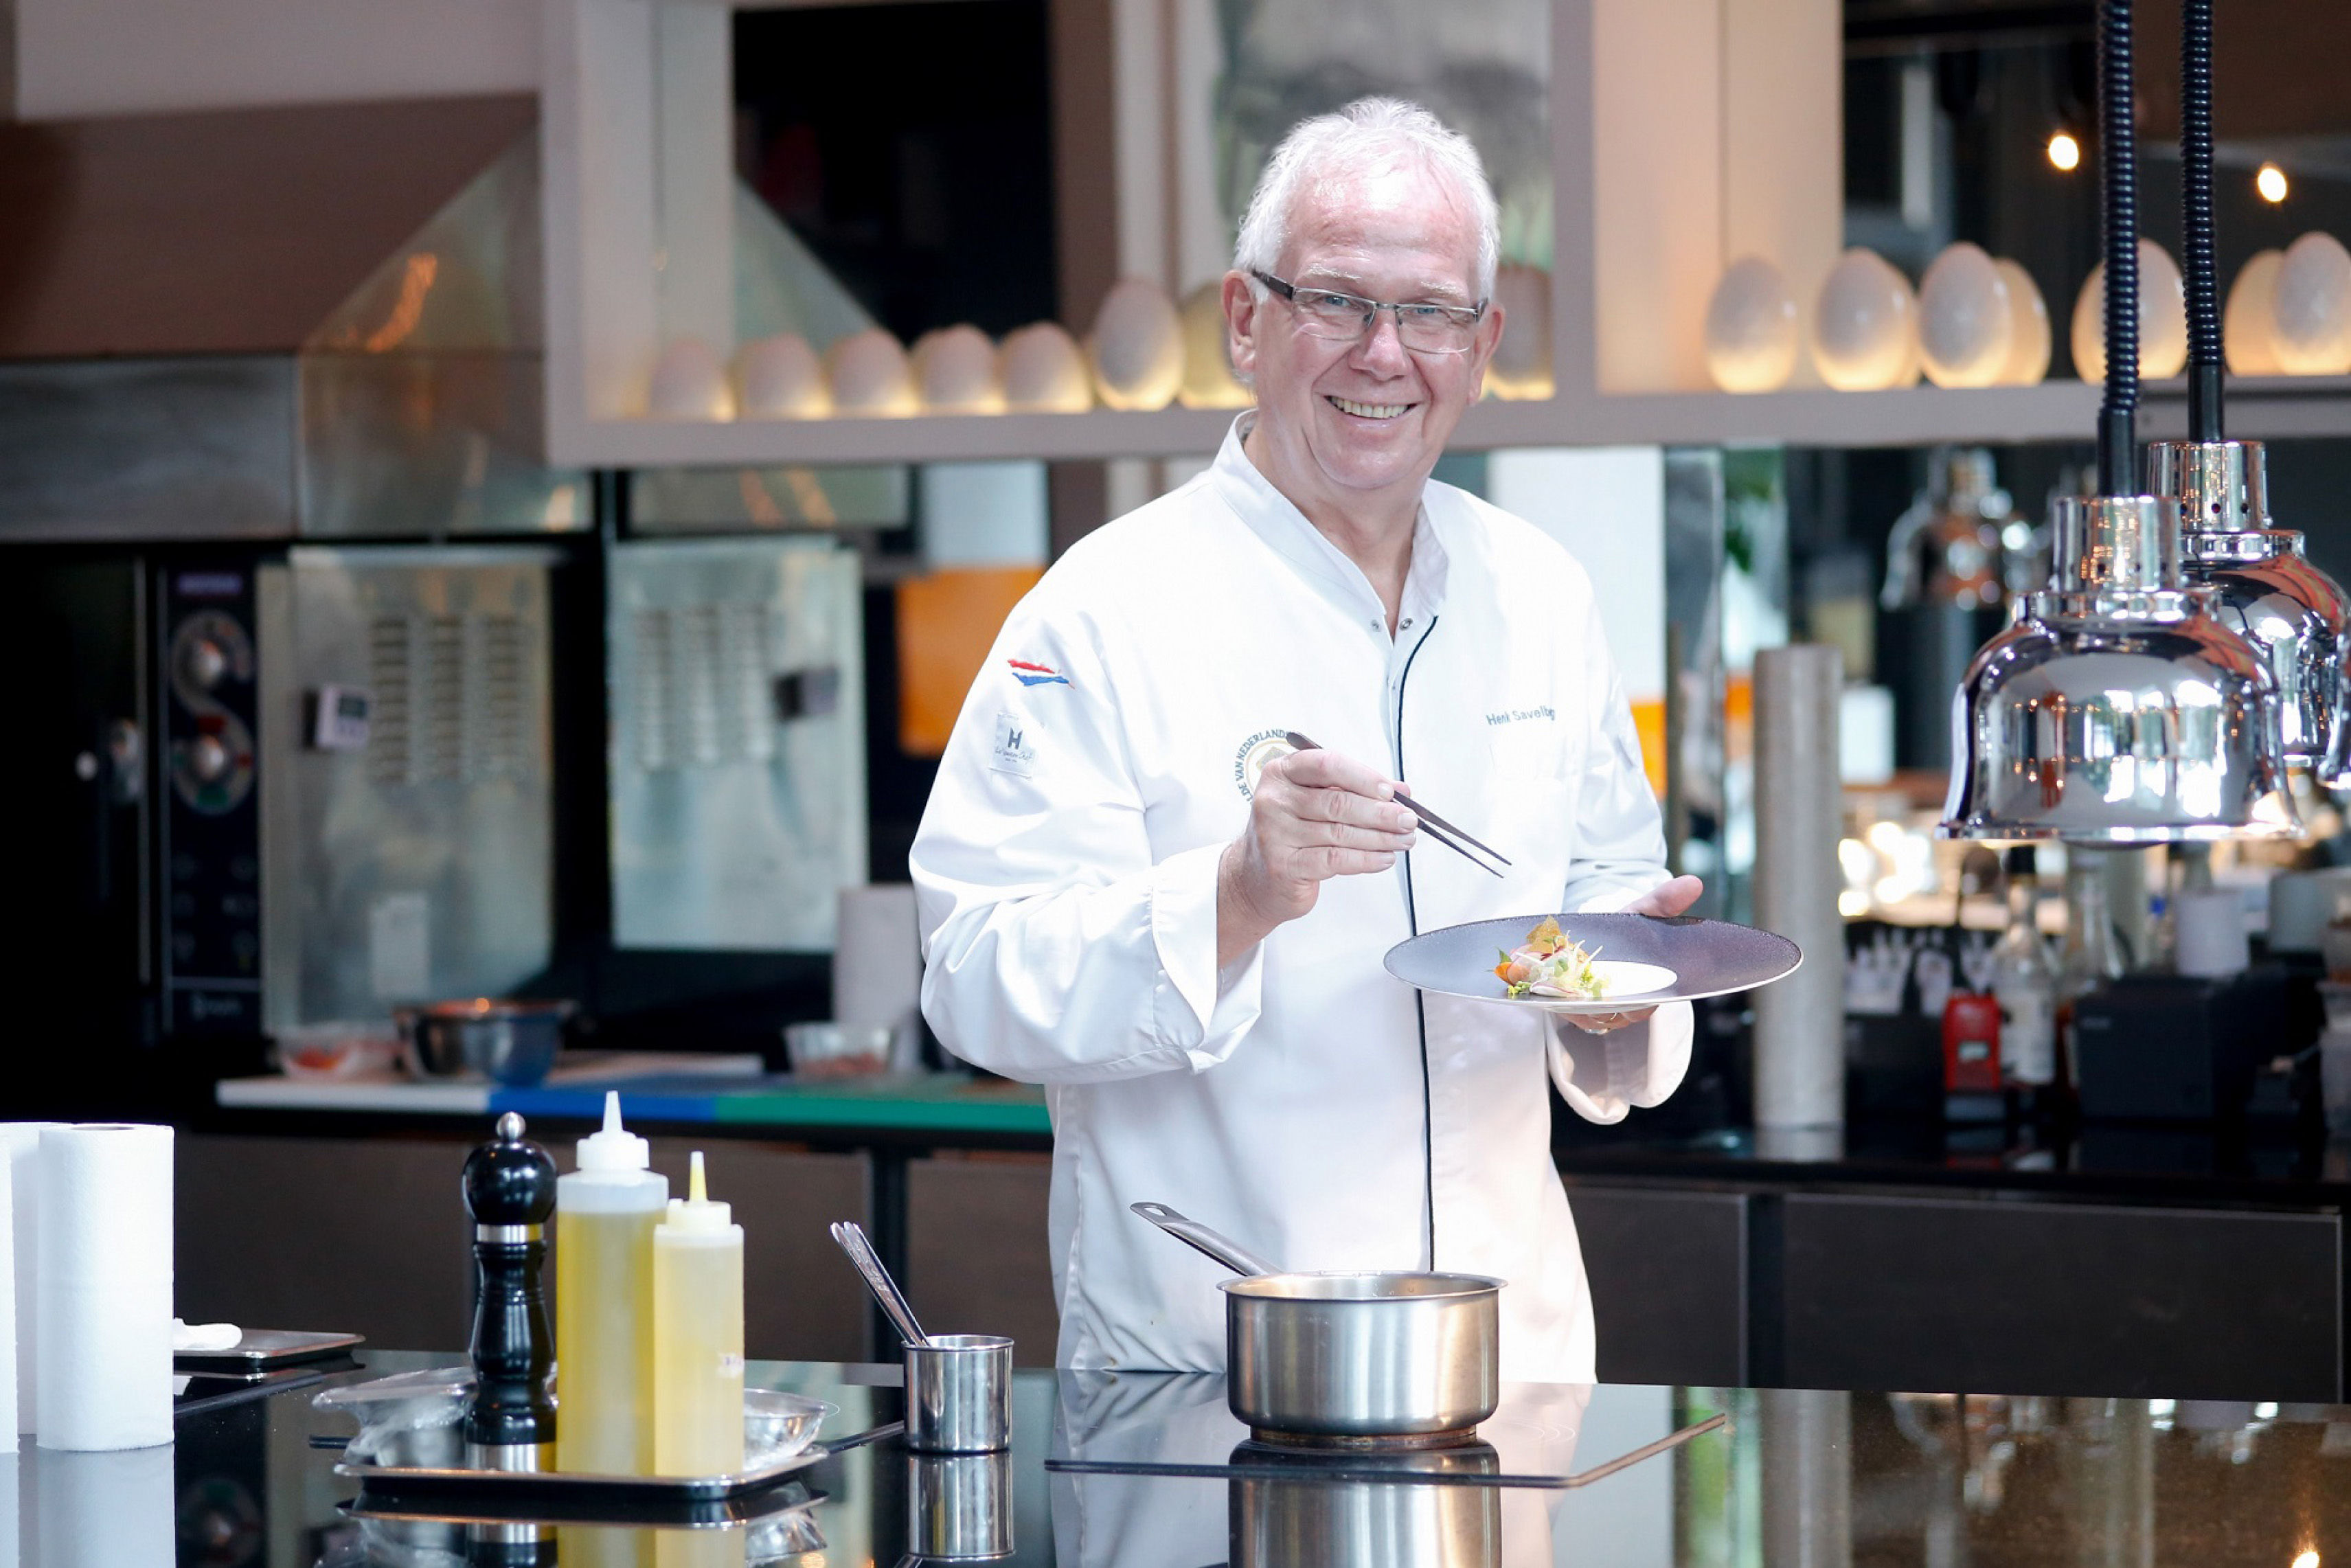 Michelin-starred Chef Savelberg takes his culinary powers to InterContinental Hua Hin for one night only